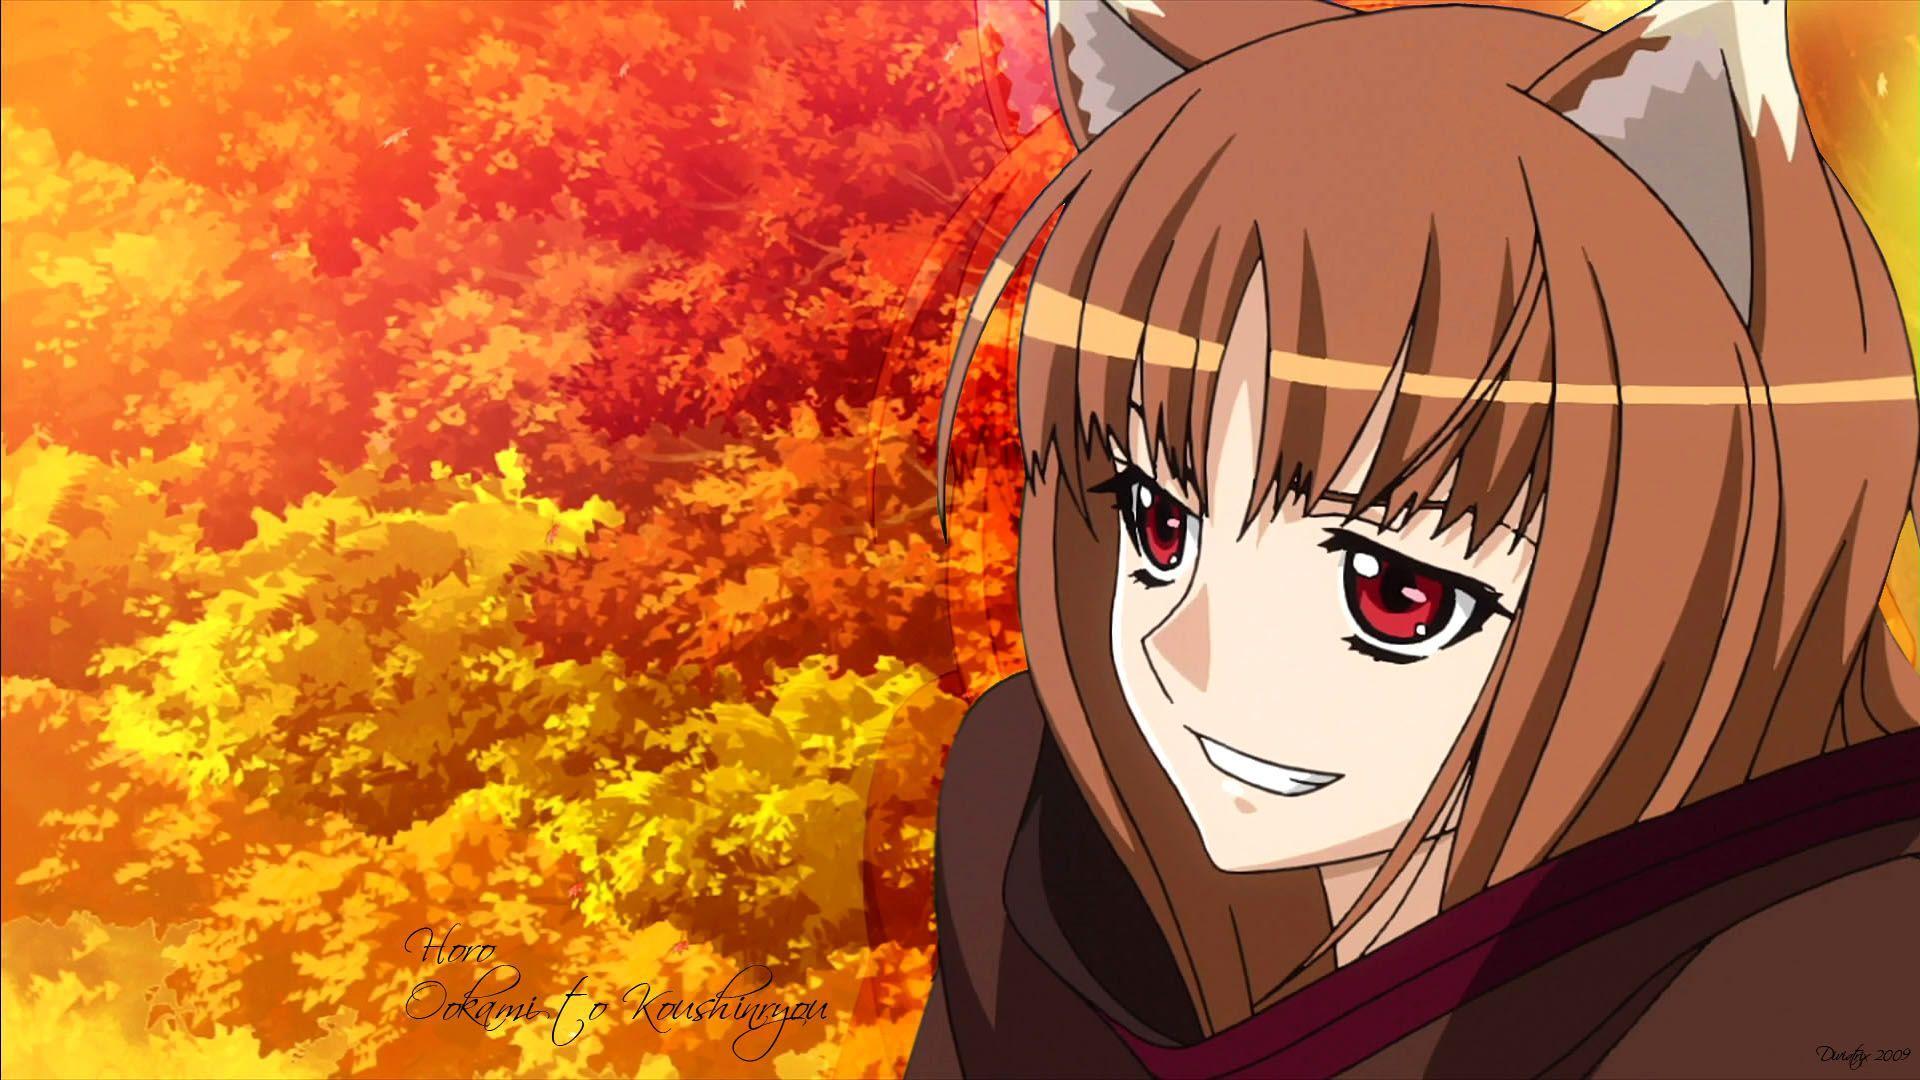 Spice And Wolf Wallpapers Wallpaper Cave